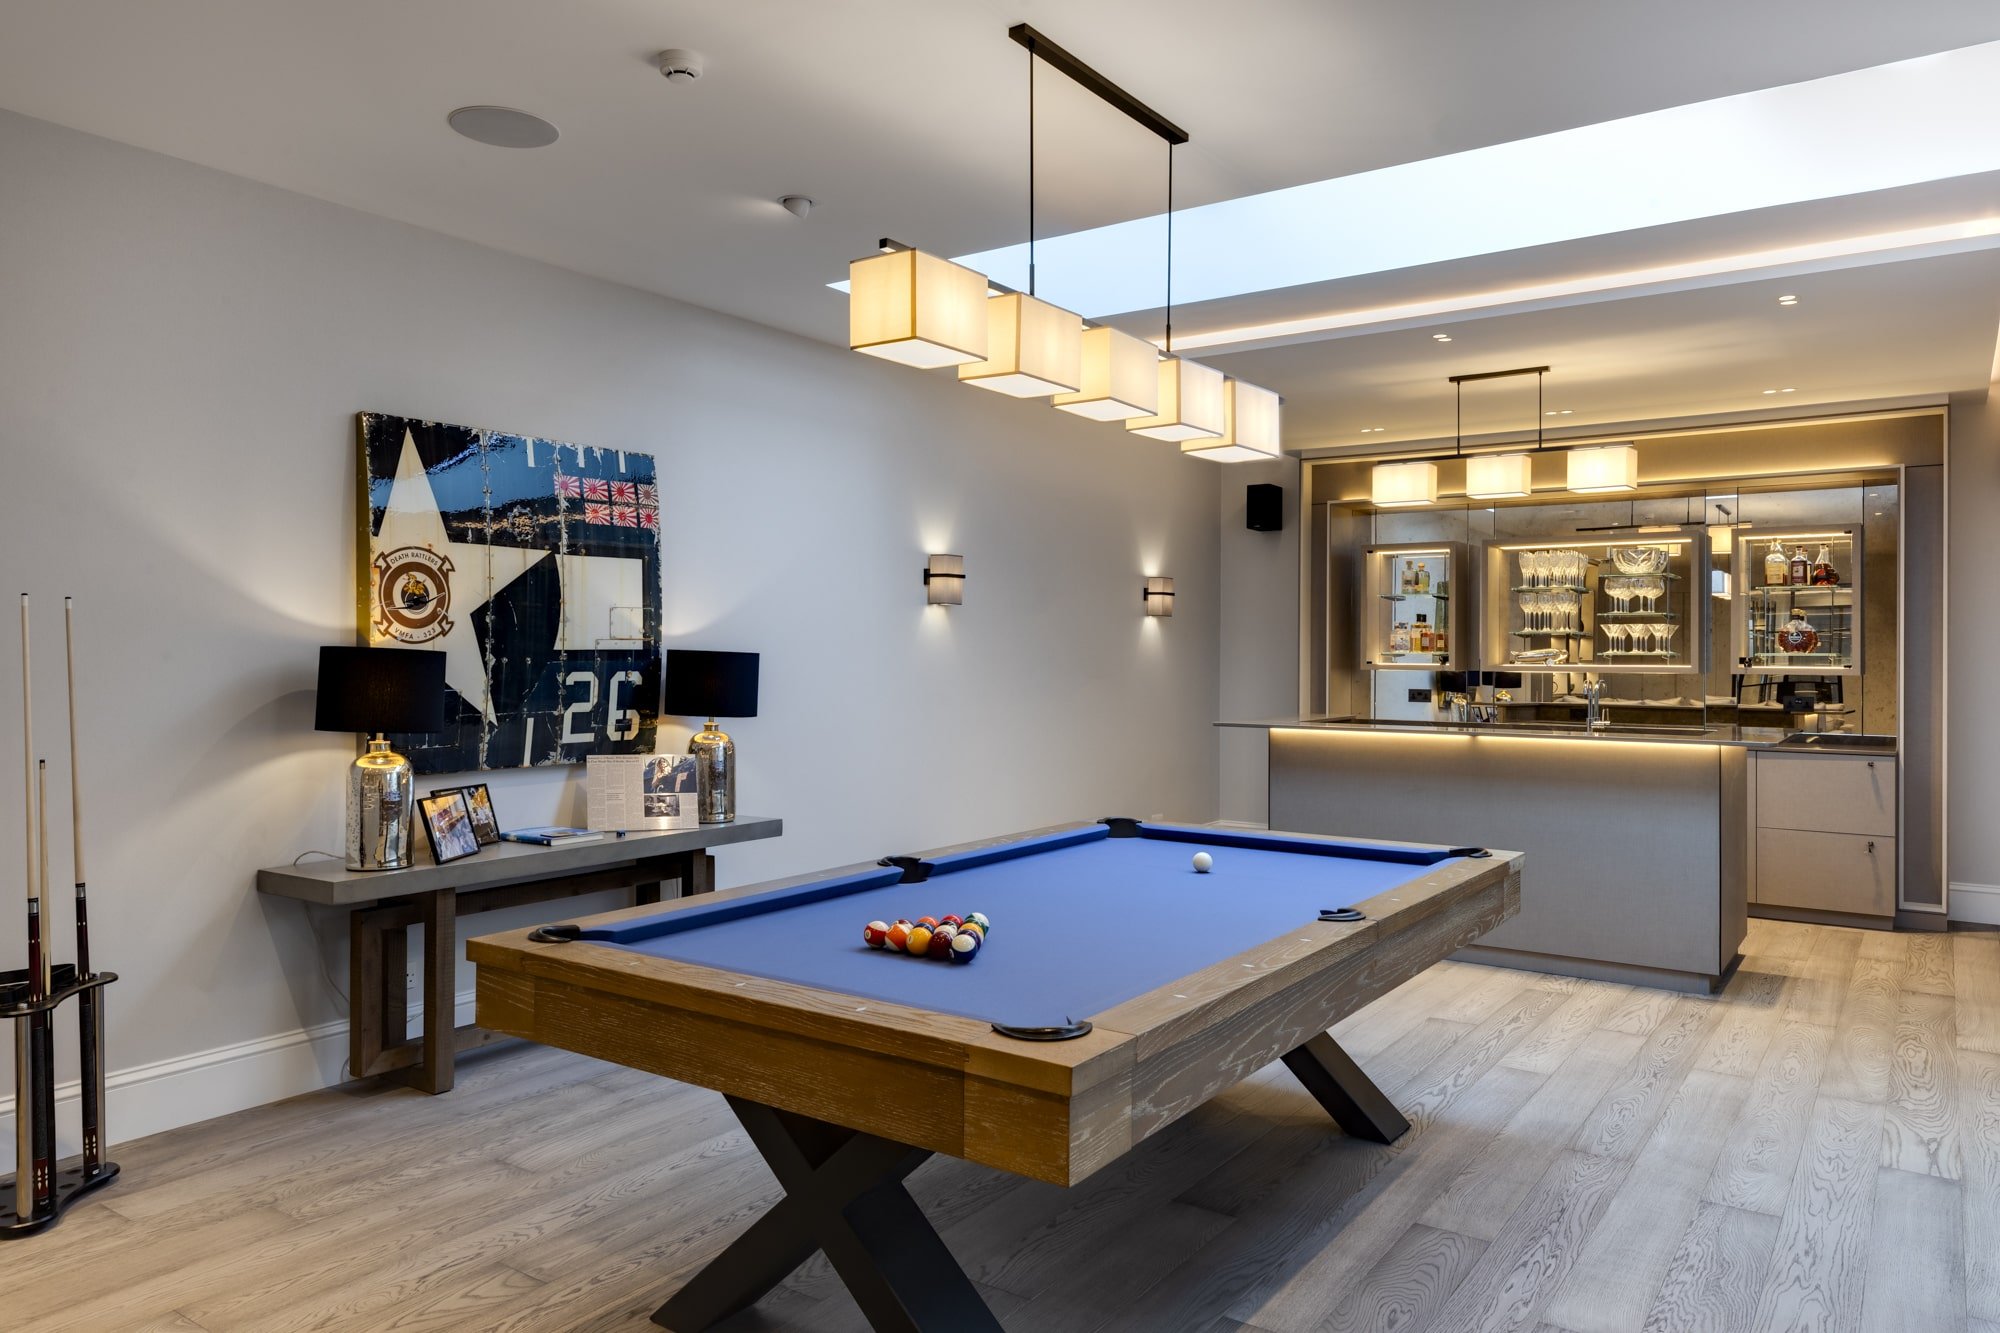 An modern basement extension with a pool table in the middle of the room infront of a mini bar next to a side table displaying lighting and a wall graphic